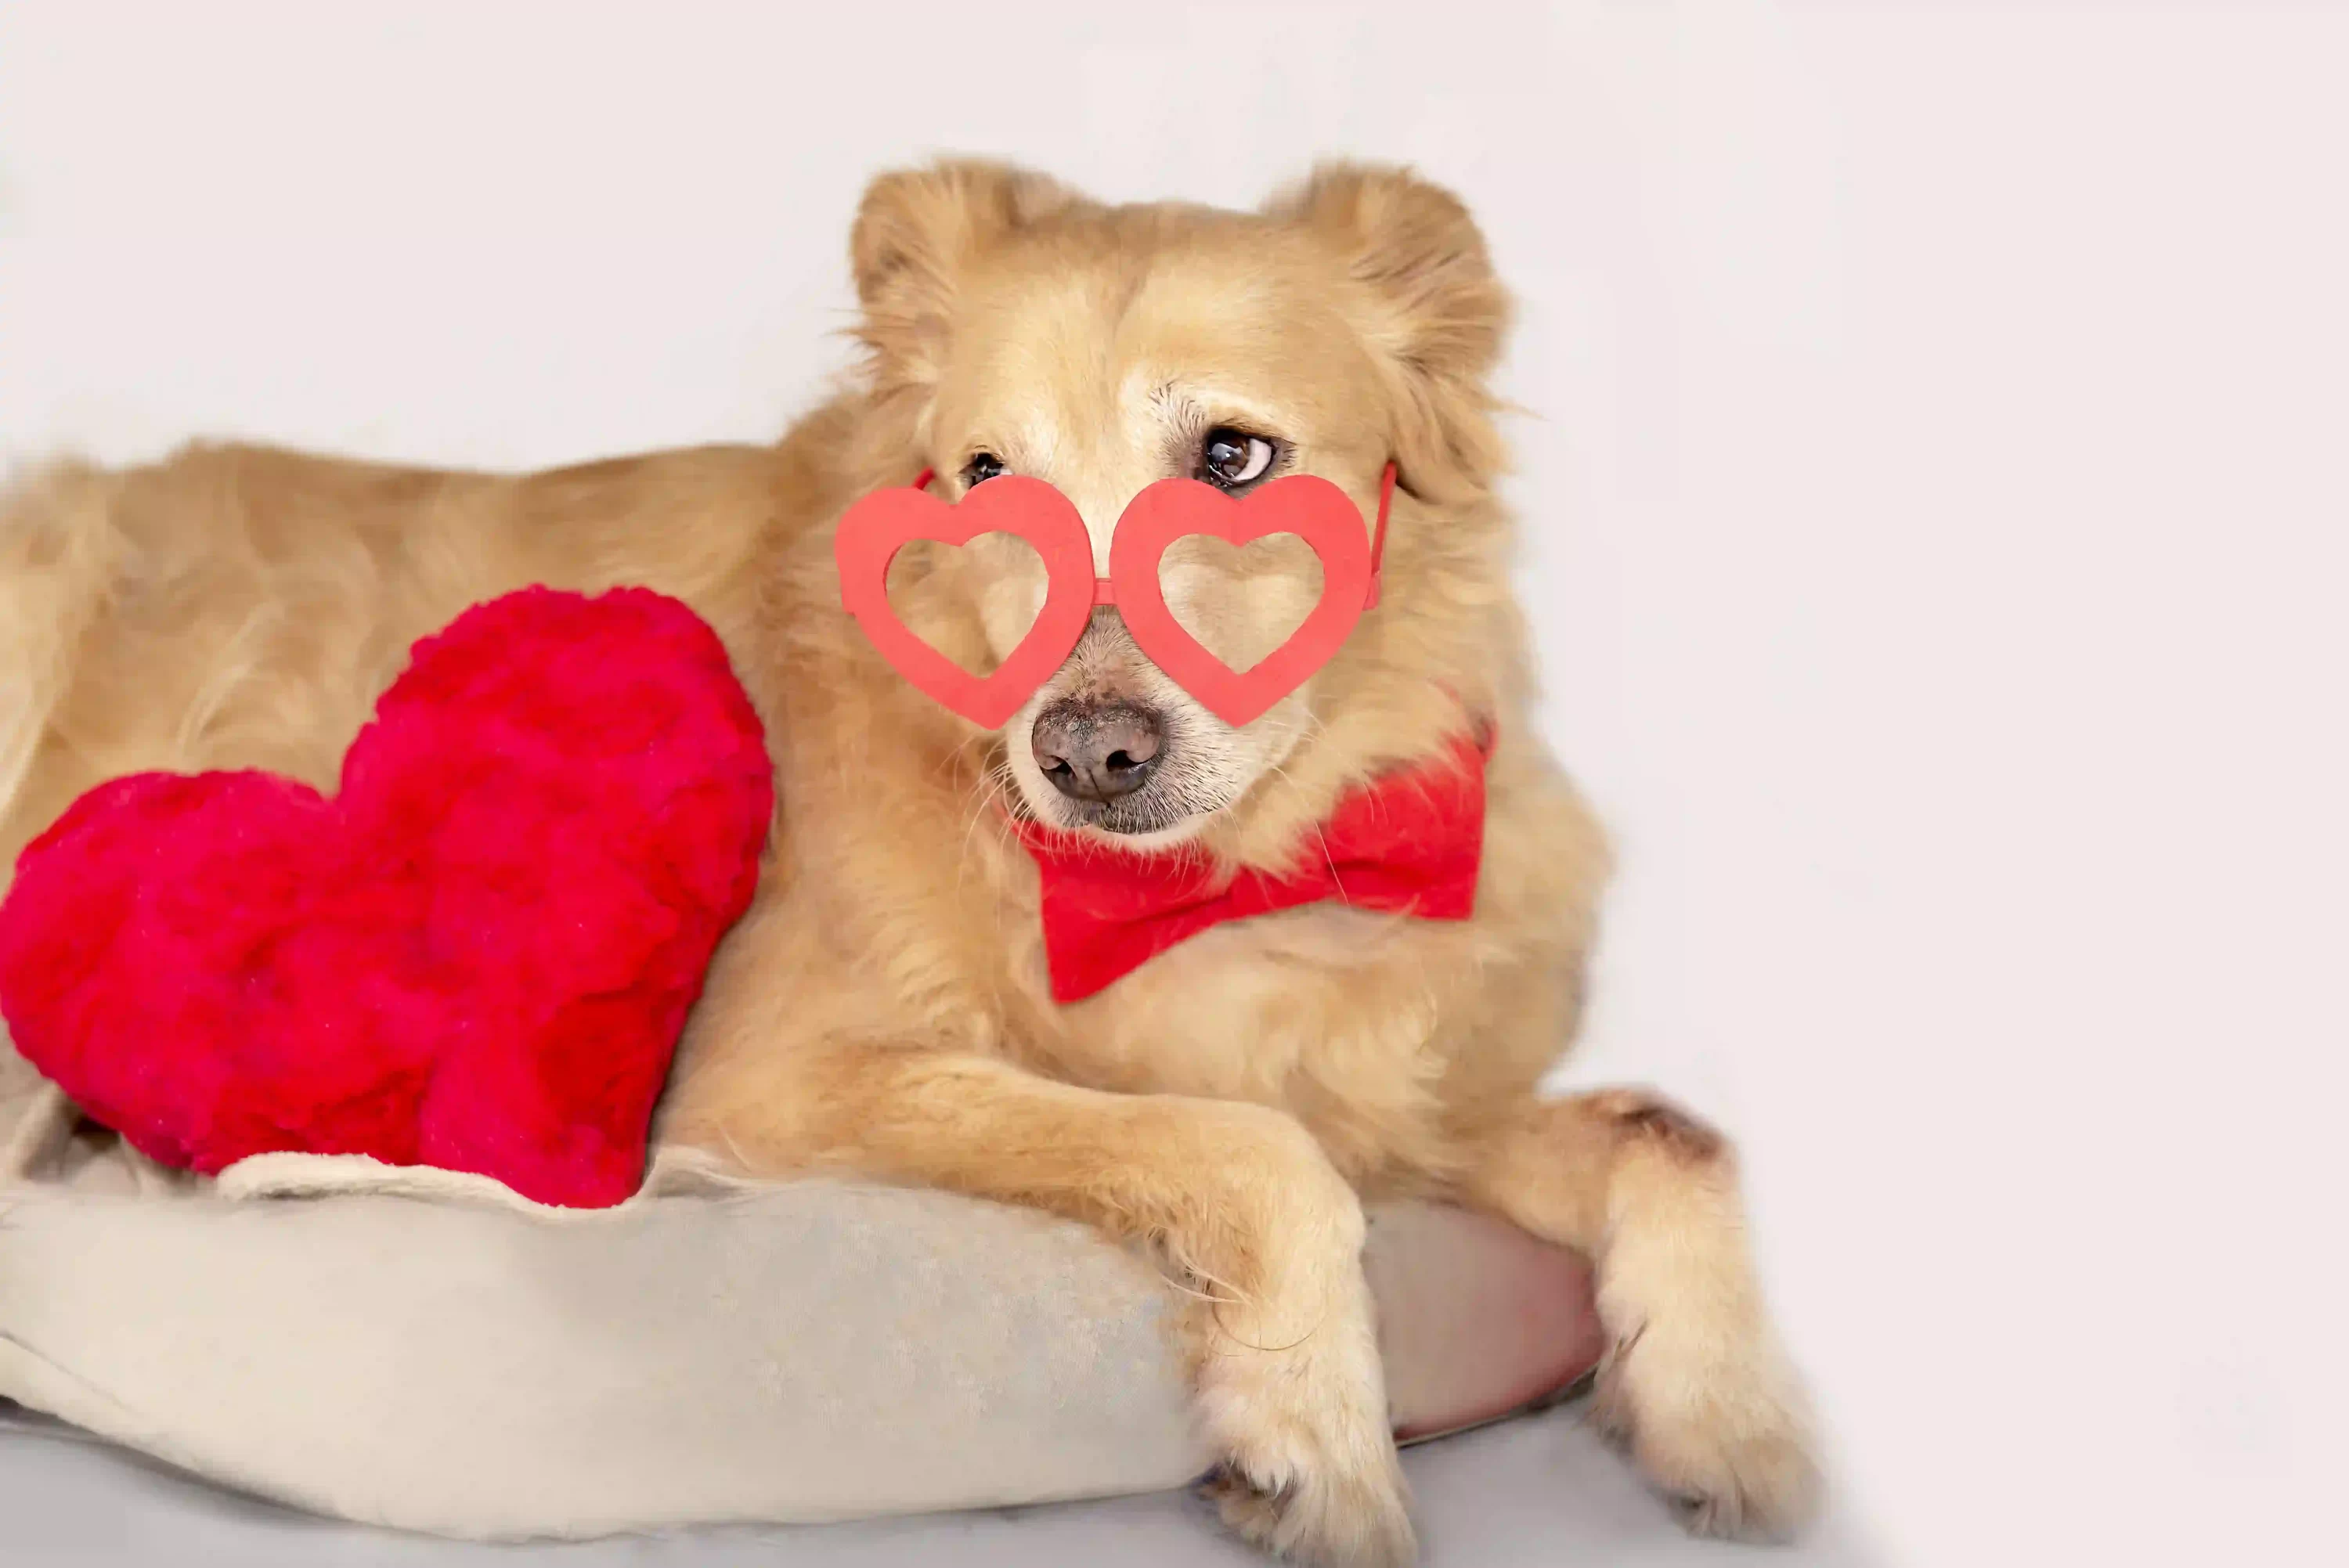 Dog wearing read bow tie and glasses. Valentines Day Gifts for pets.